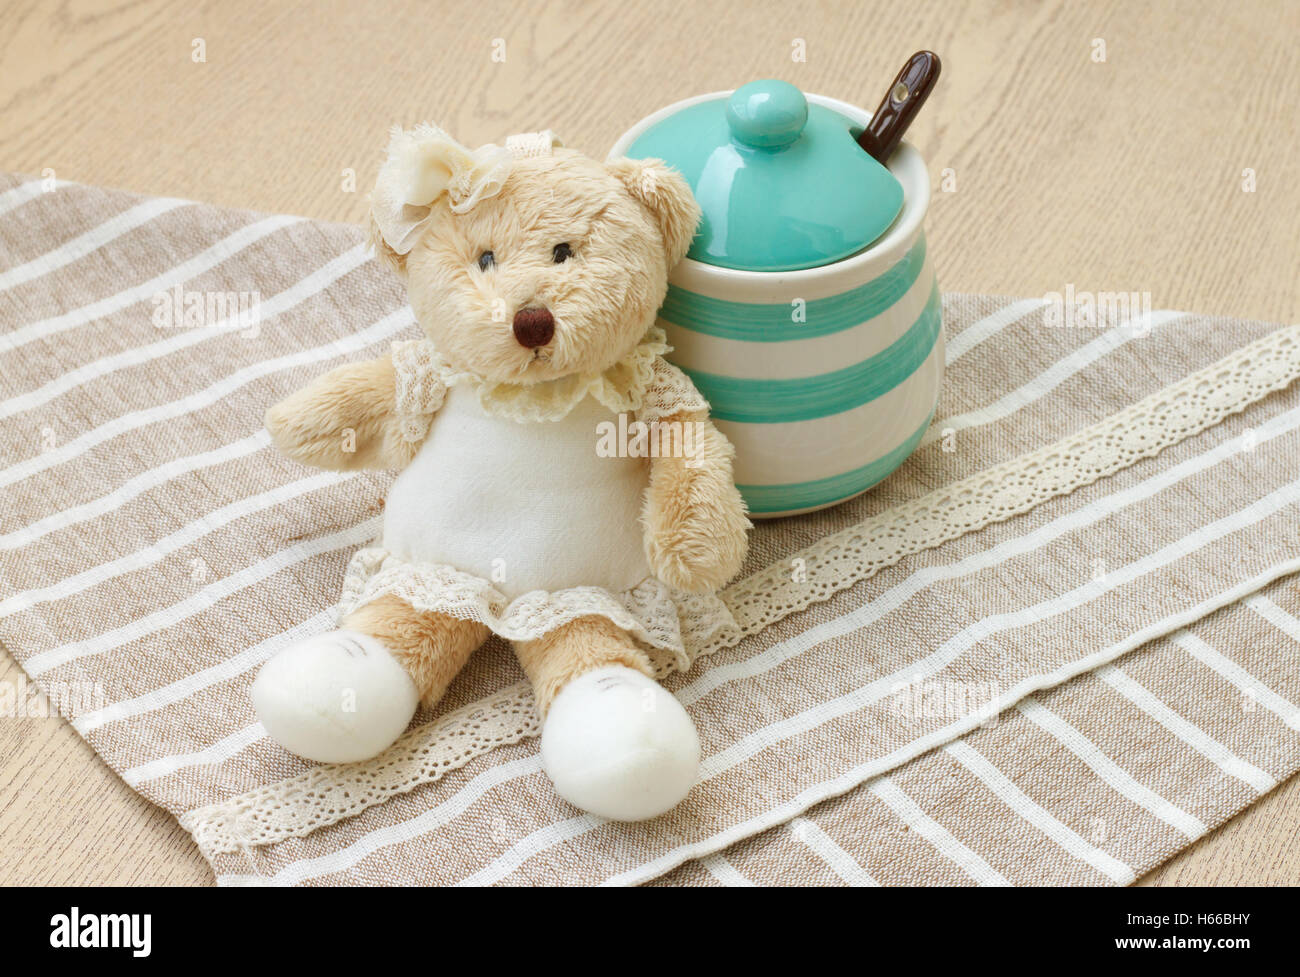 Green pastel porcelain jar and little bear doll with cute fabric. Stock Photo